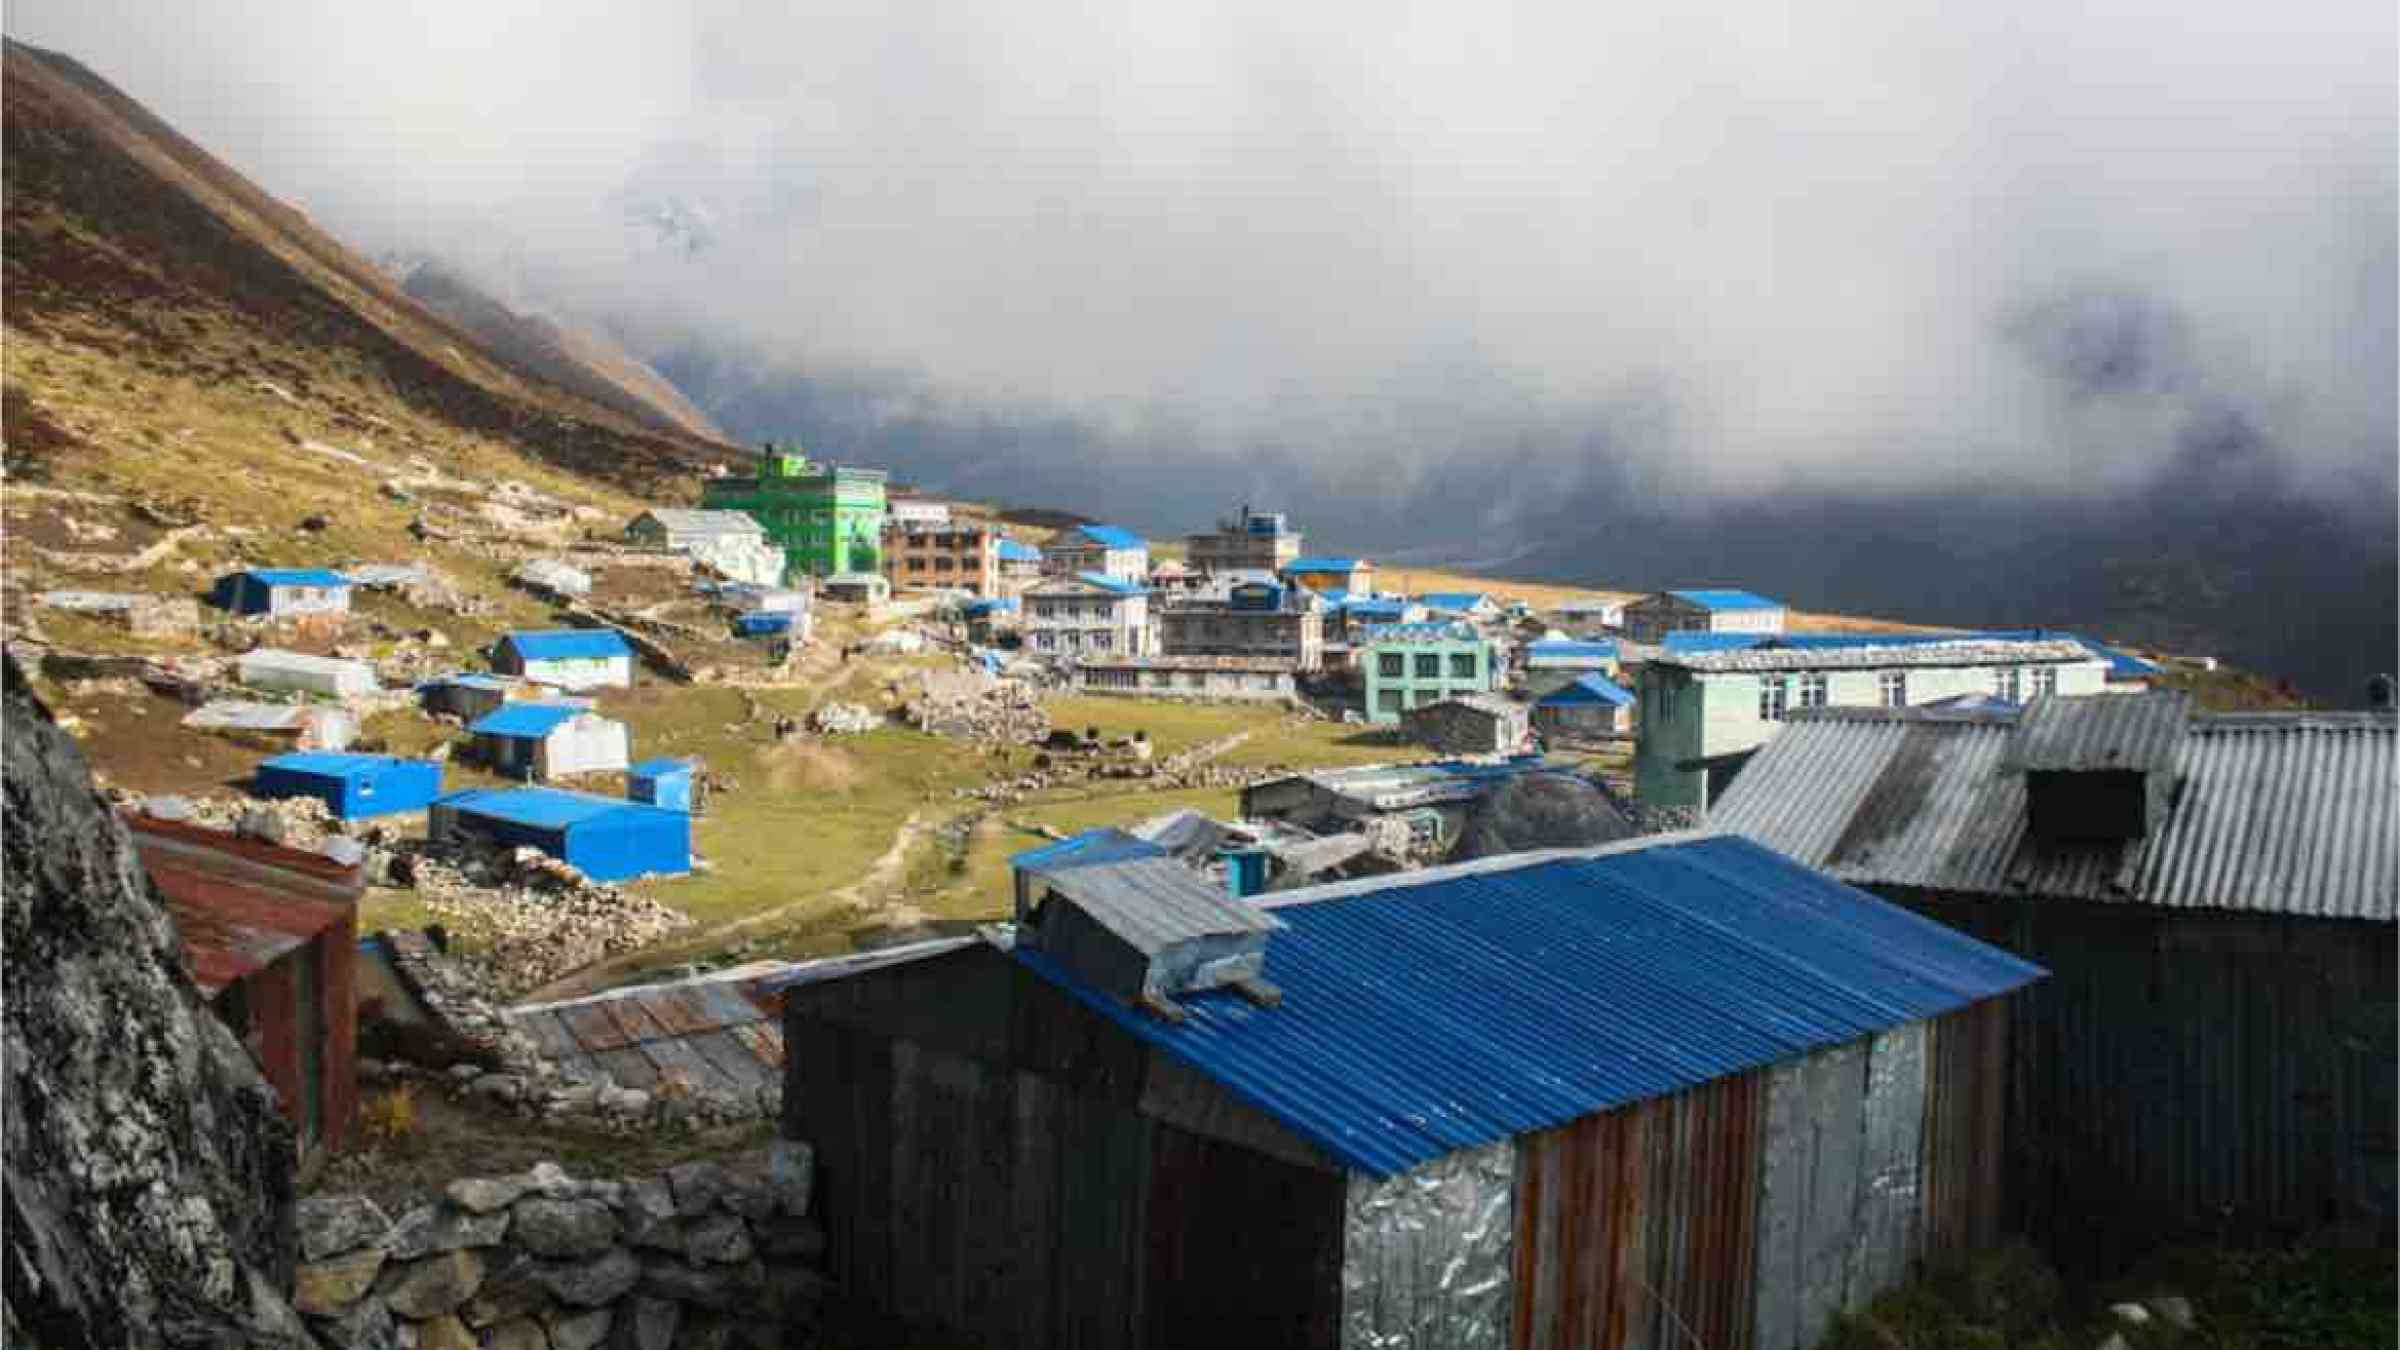 Reconstructed village in the Kyanging Valley, Nepal after the 2015 earthquake